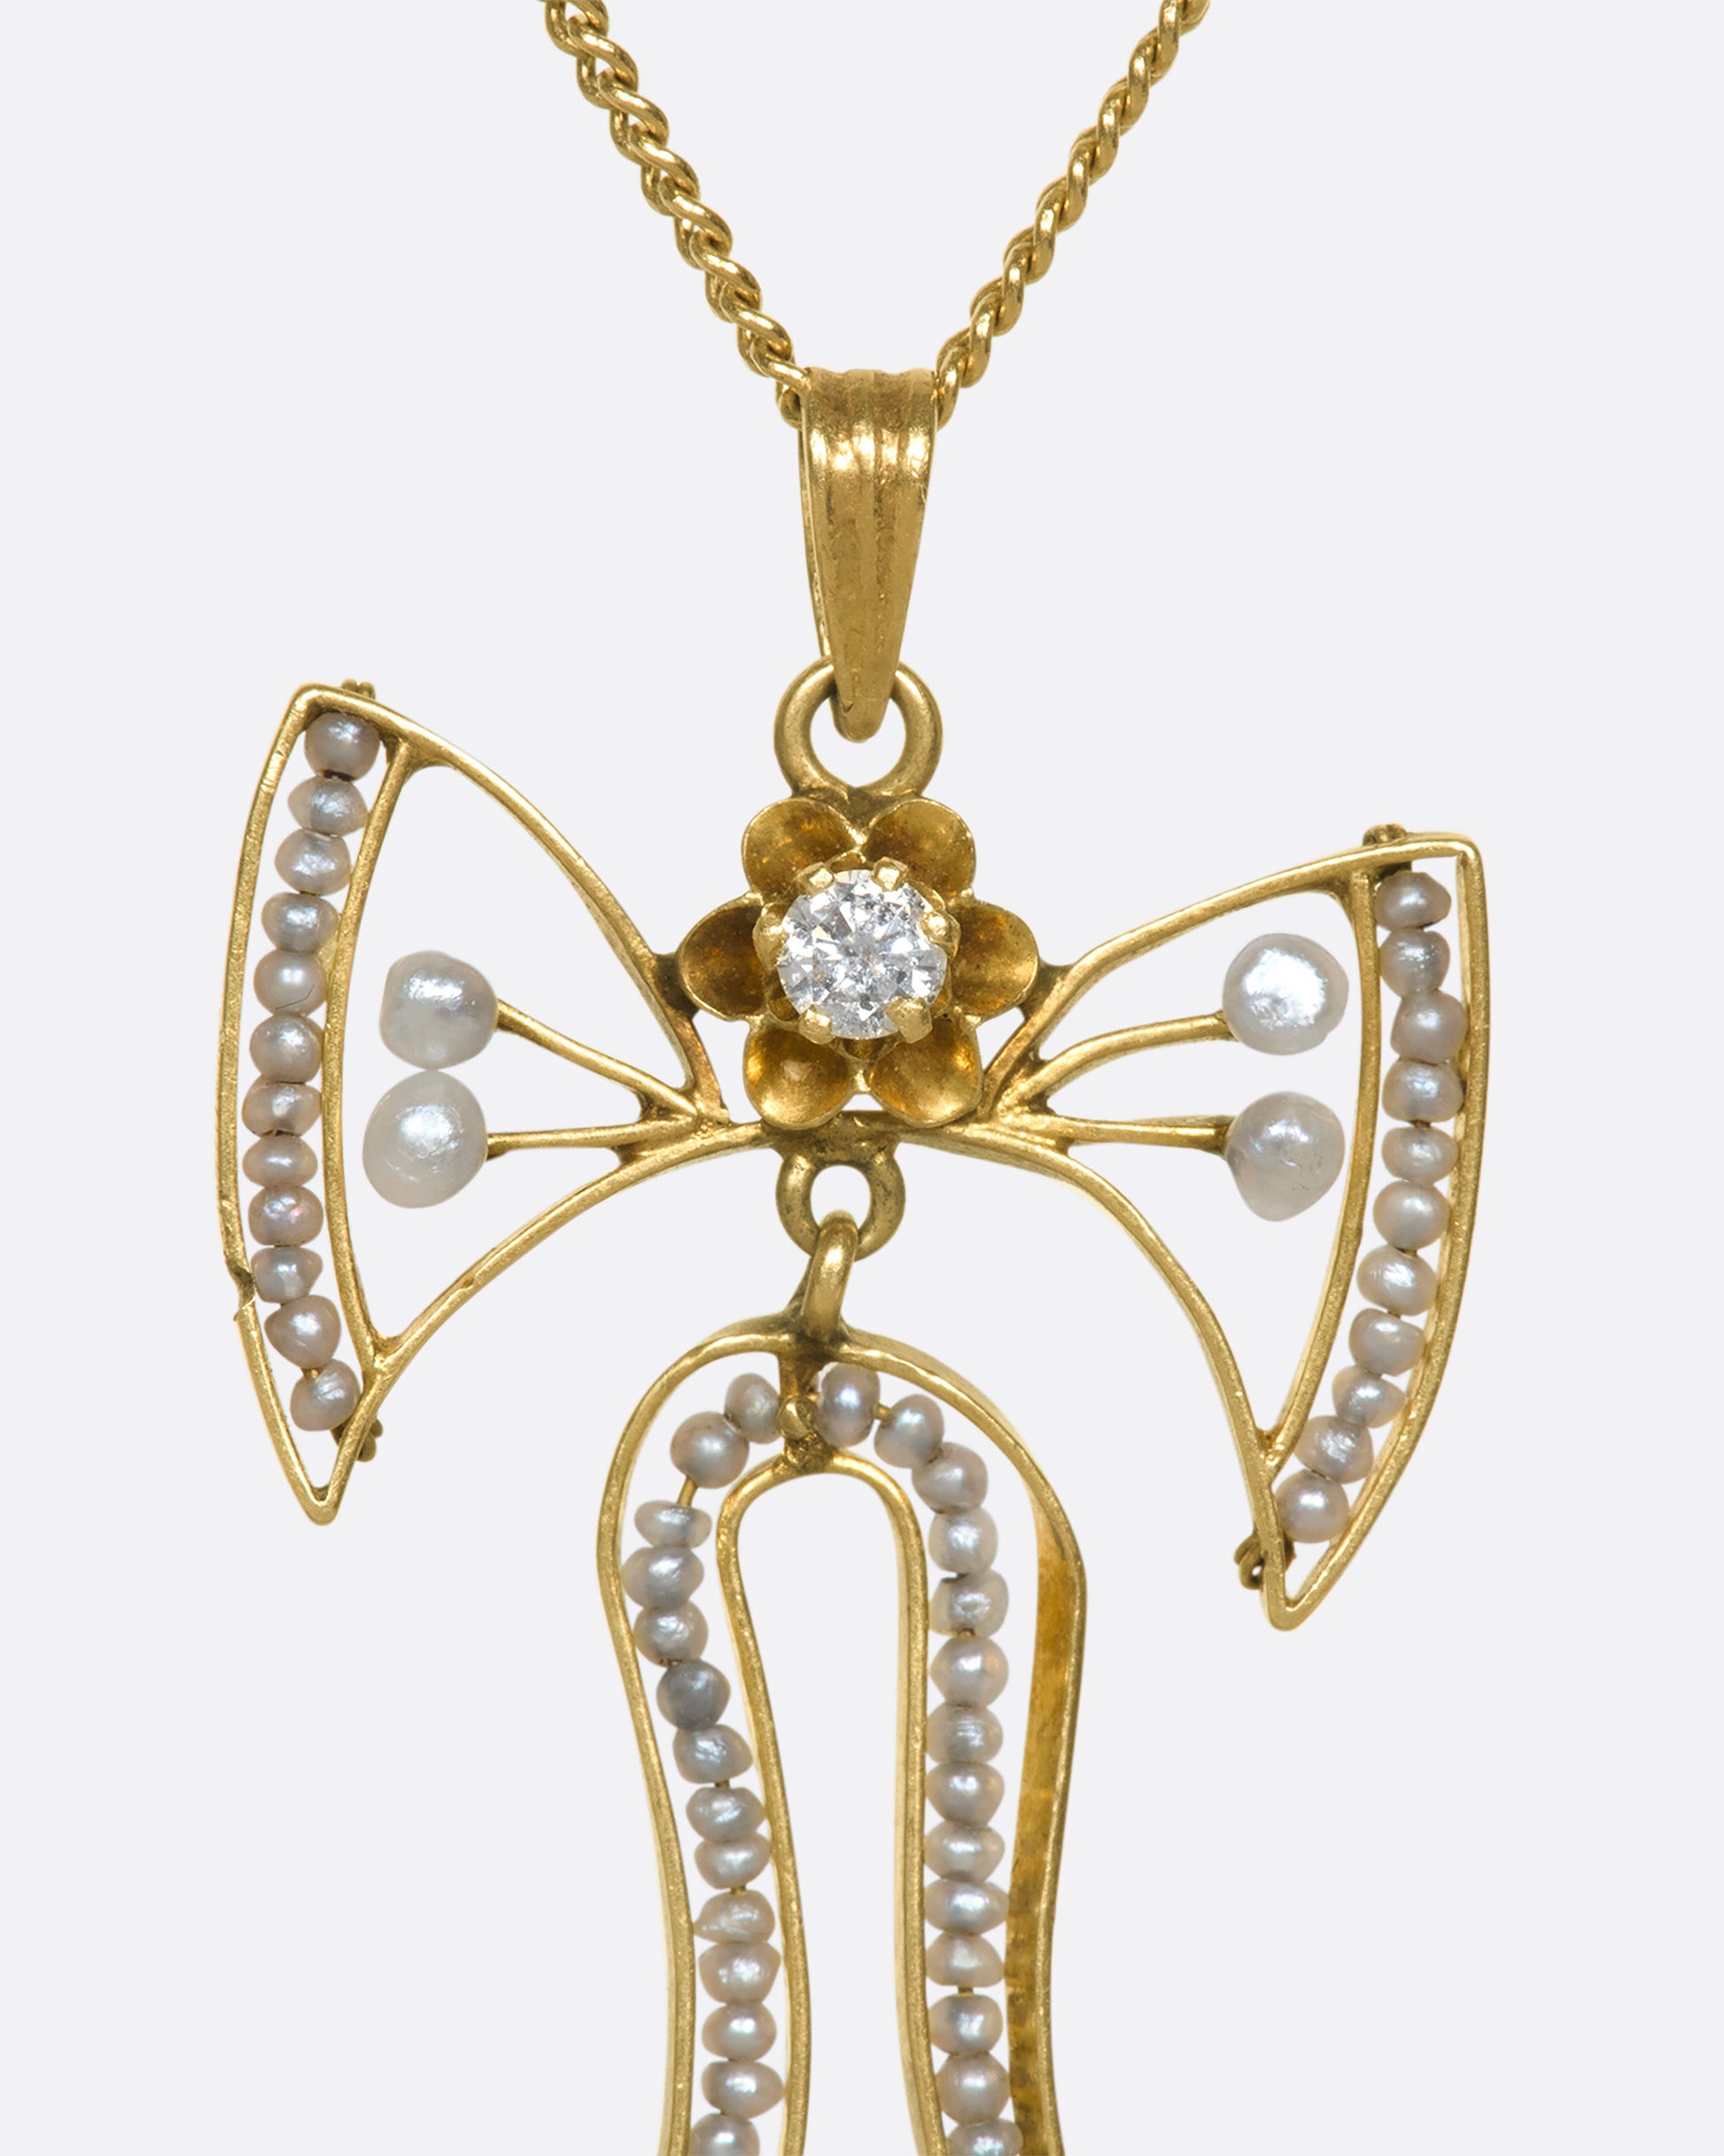 A close up view of a the top half of a yellow gold bow pendant with seed pearls and a diamond.